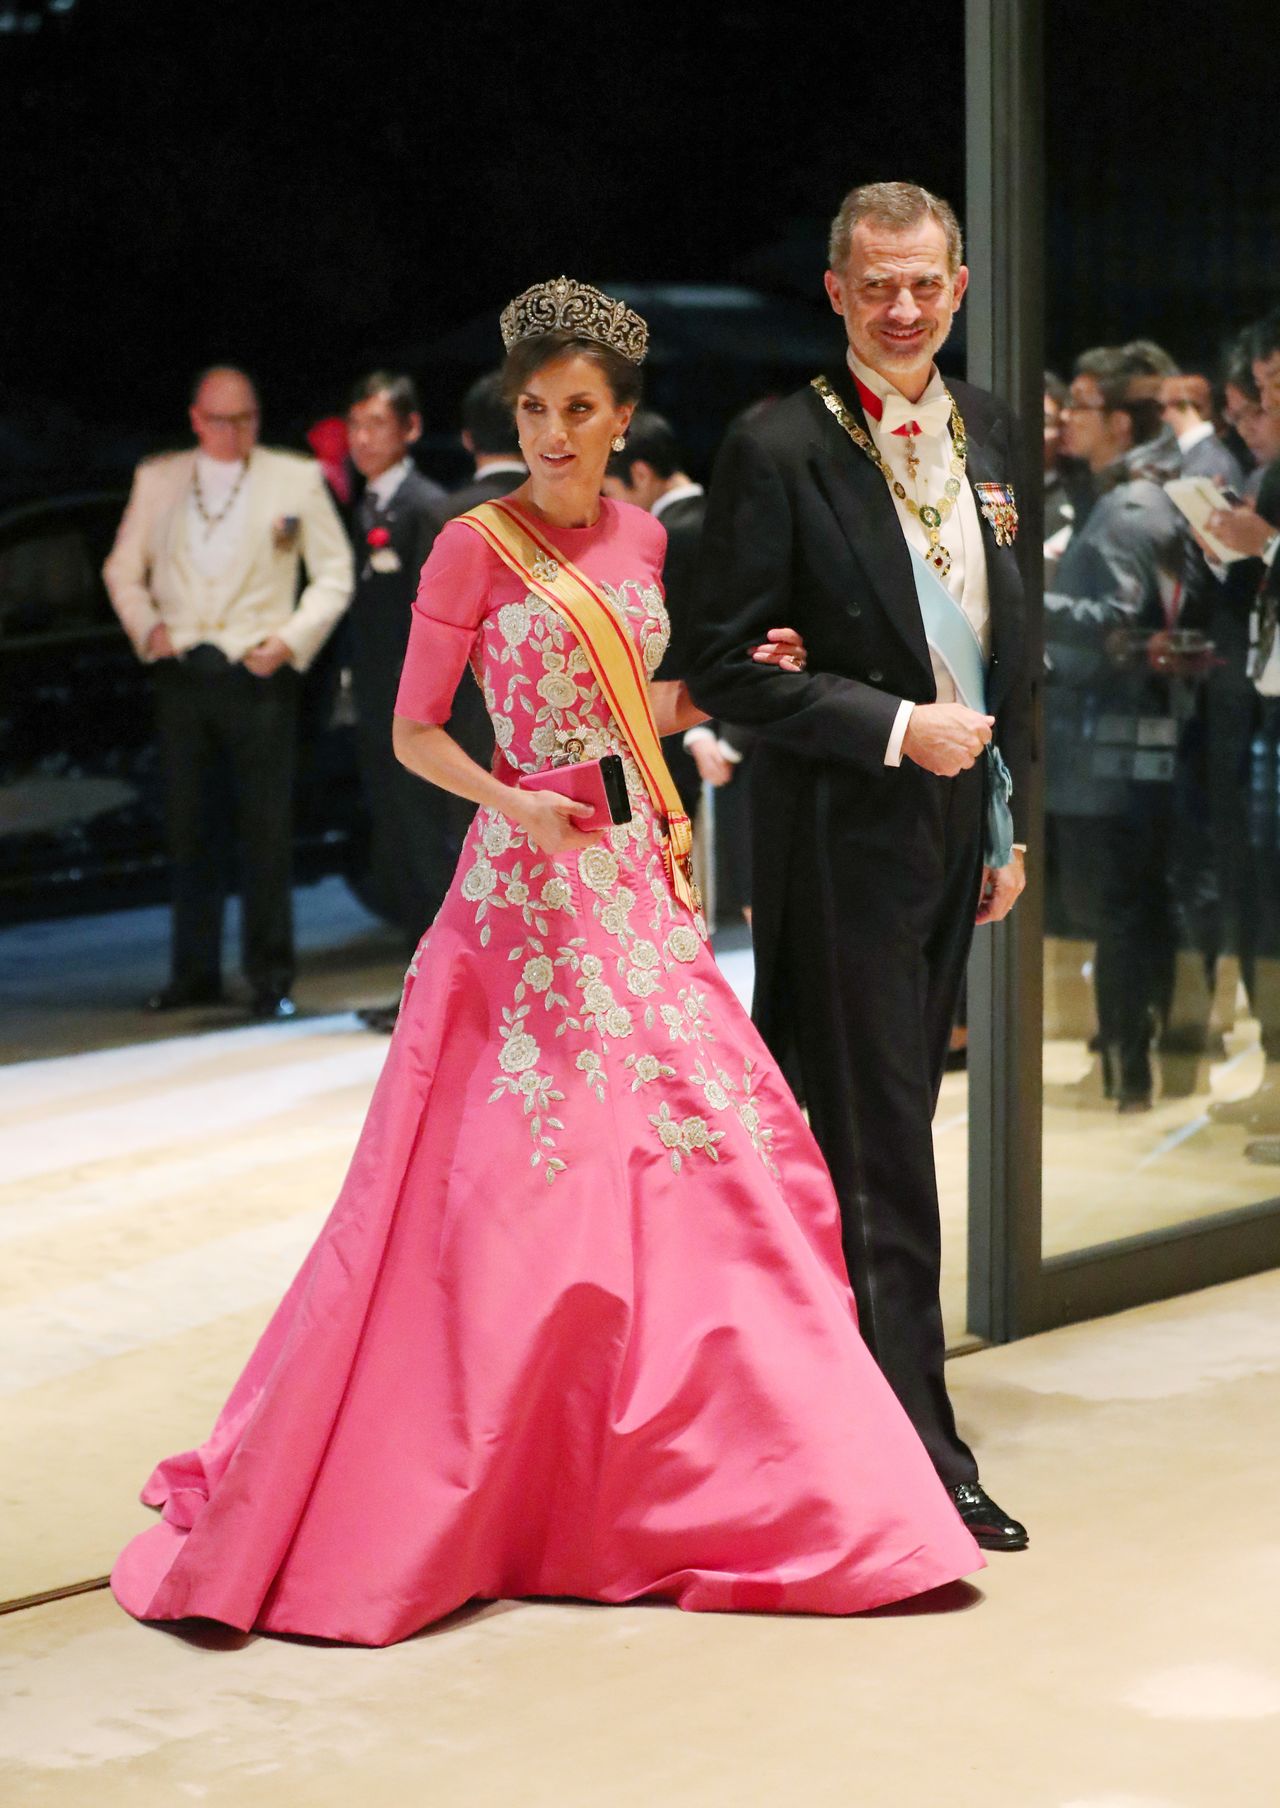 King Felipe VI and Queen Letizia of Spain enter the Imperial Palace ahead of the evening banquet. (© Jiji)